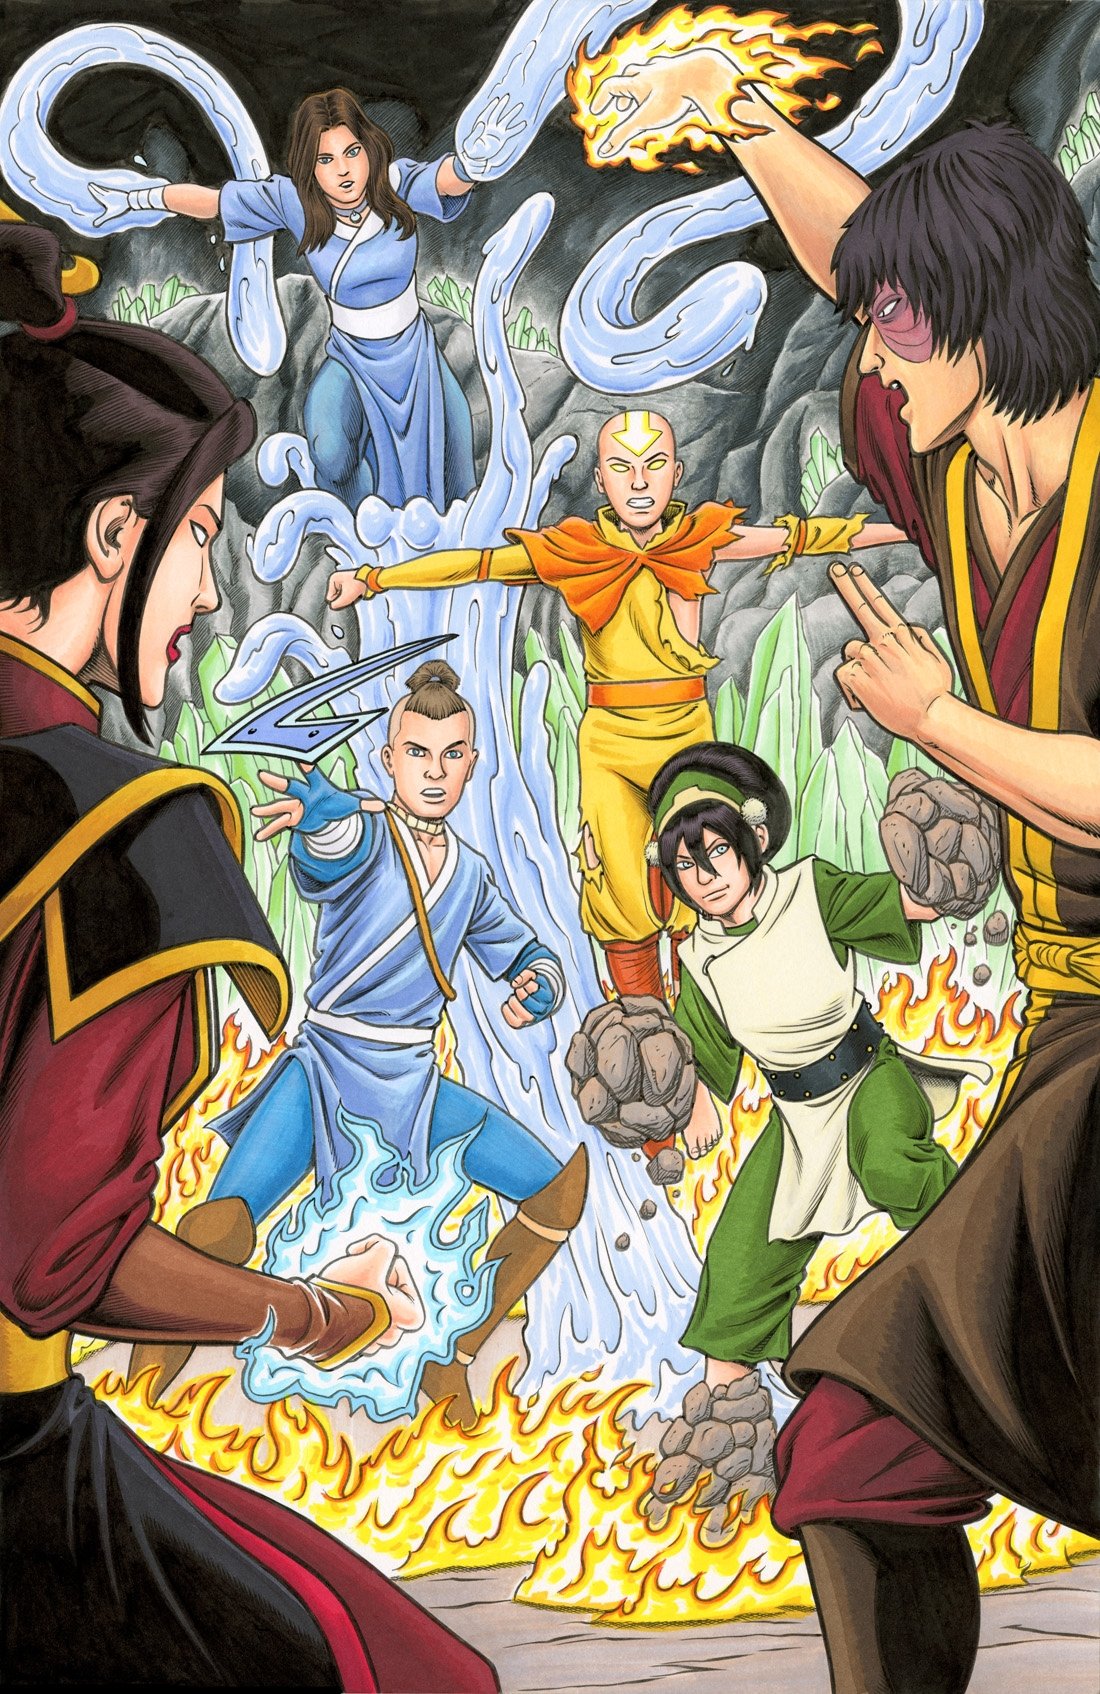 Avatar The Last Airbender In Brendon And Brian Fraim S Commissions Comic Art Gallery Room